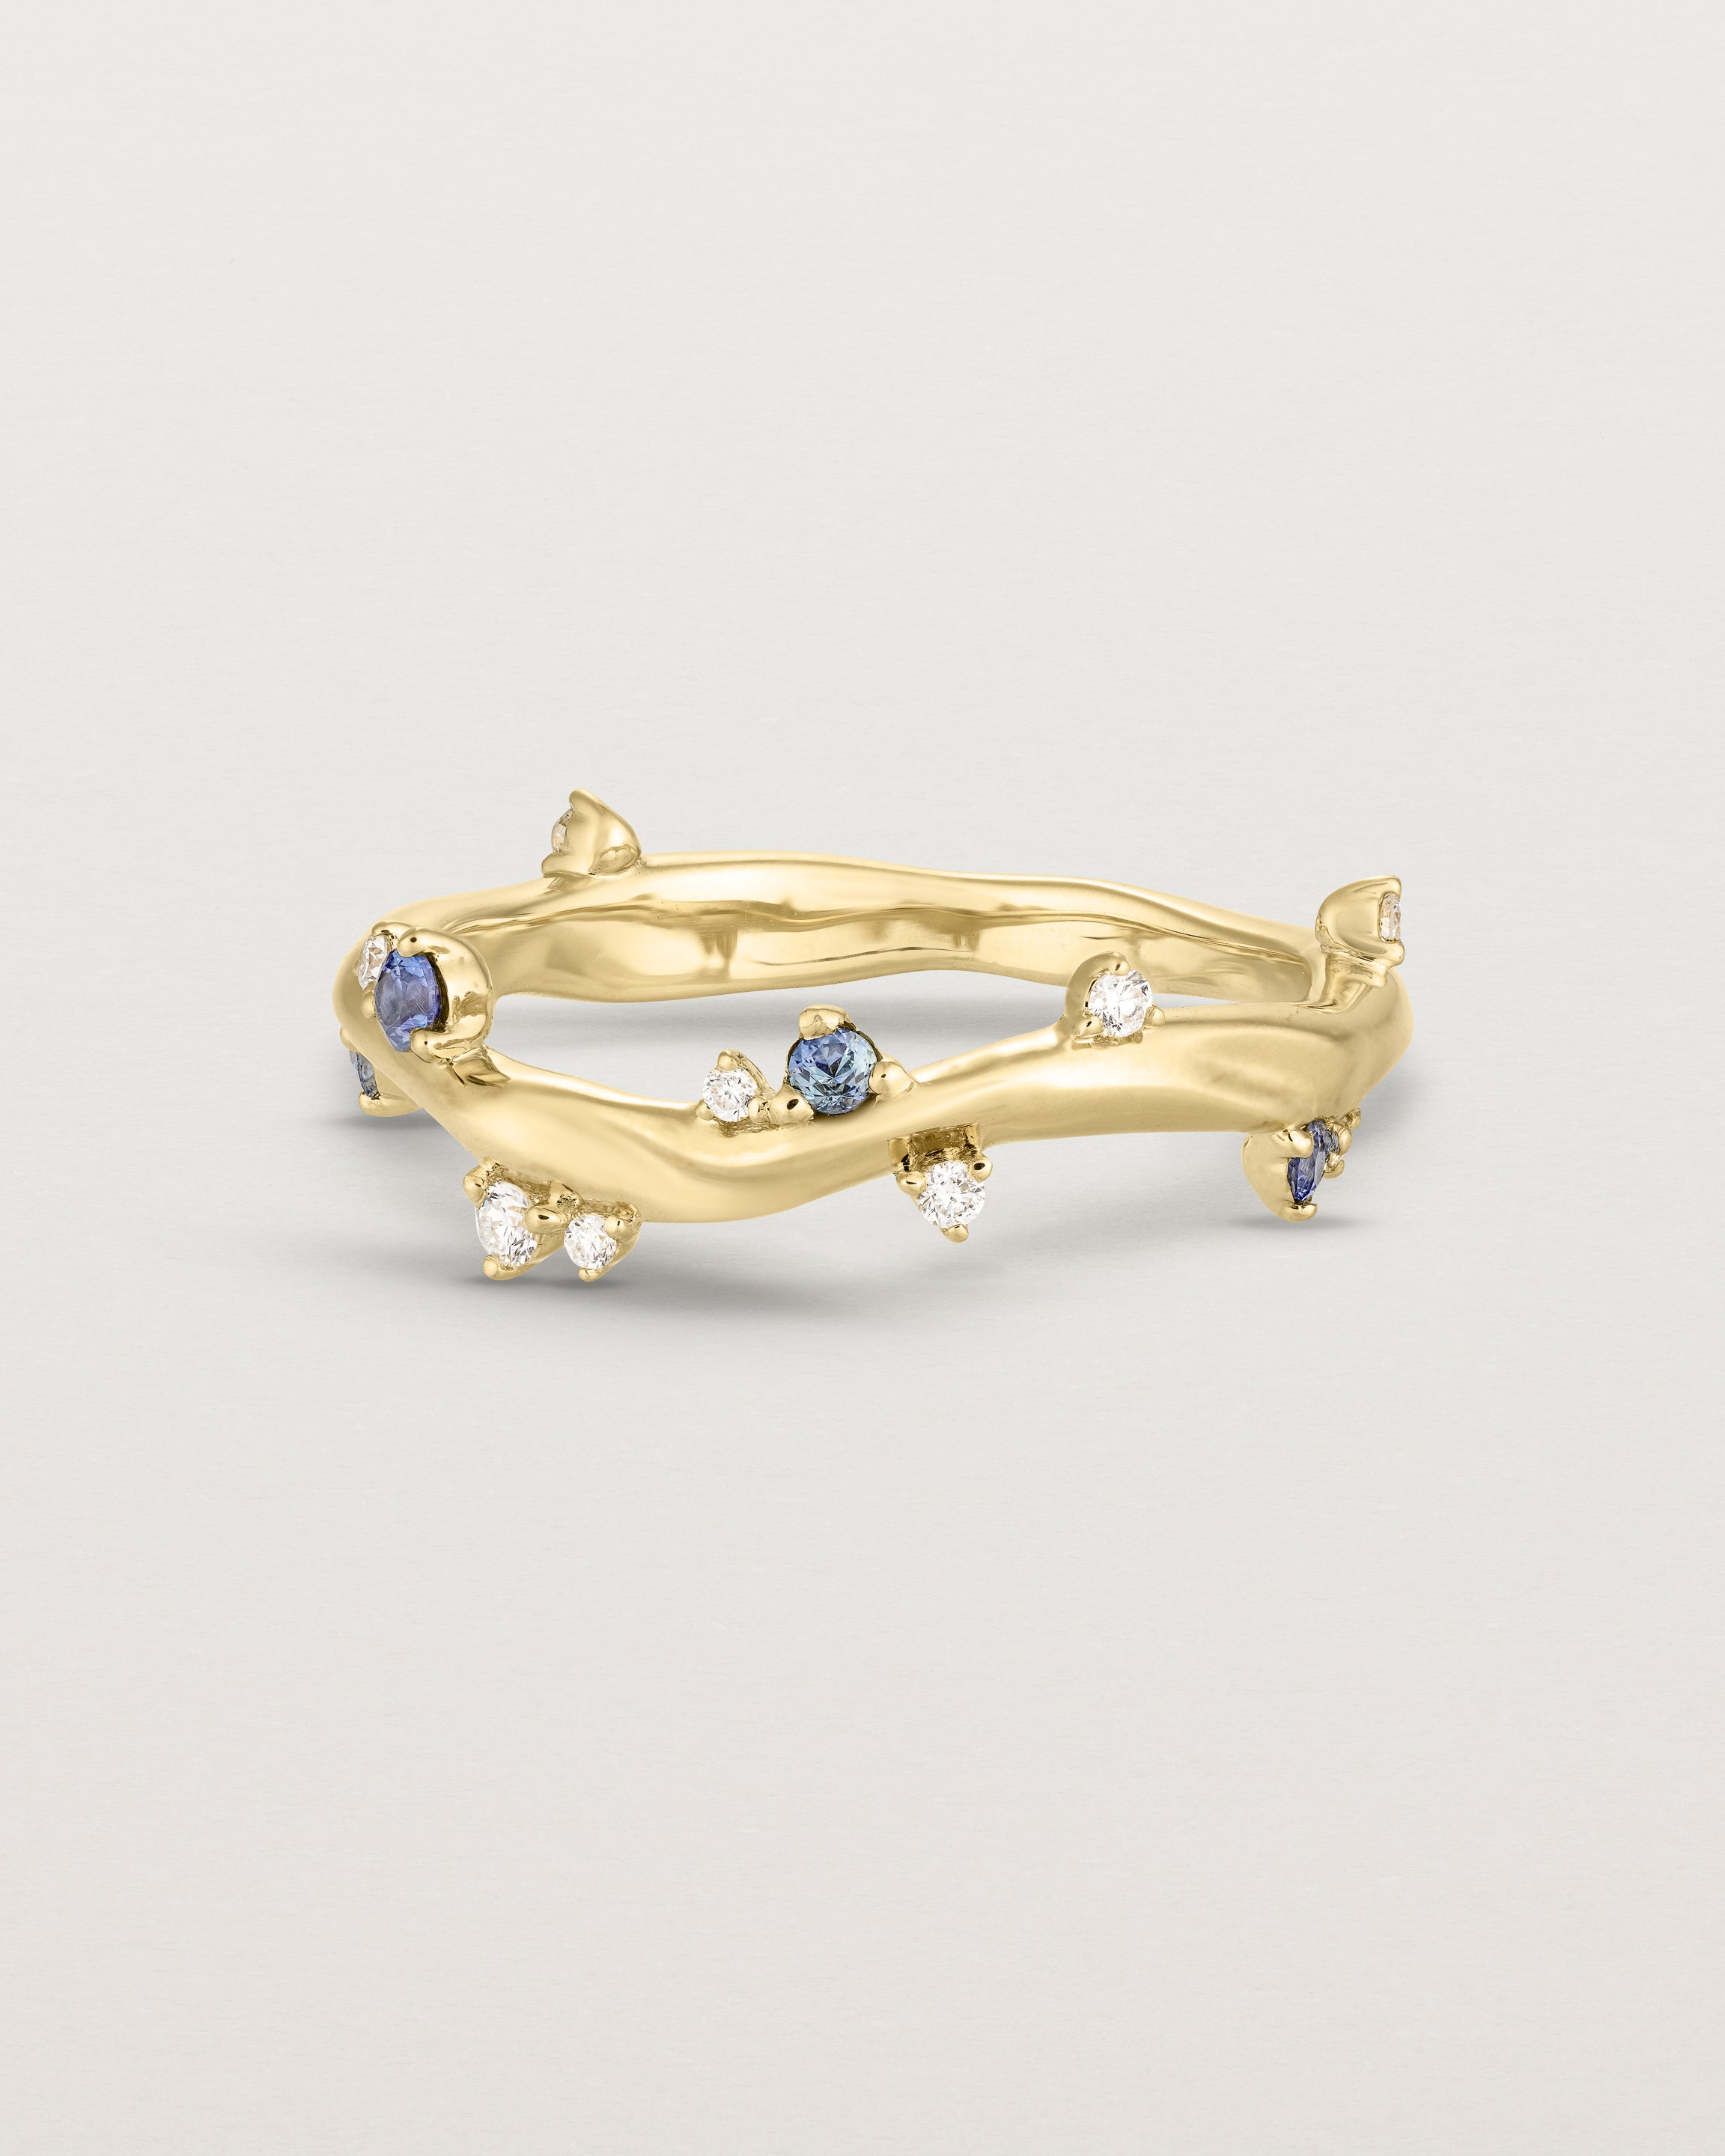 Front image of the Ember ring in yellow gold featuring a scattering of white diamonds and blue sapphires.